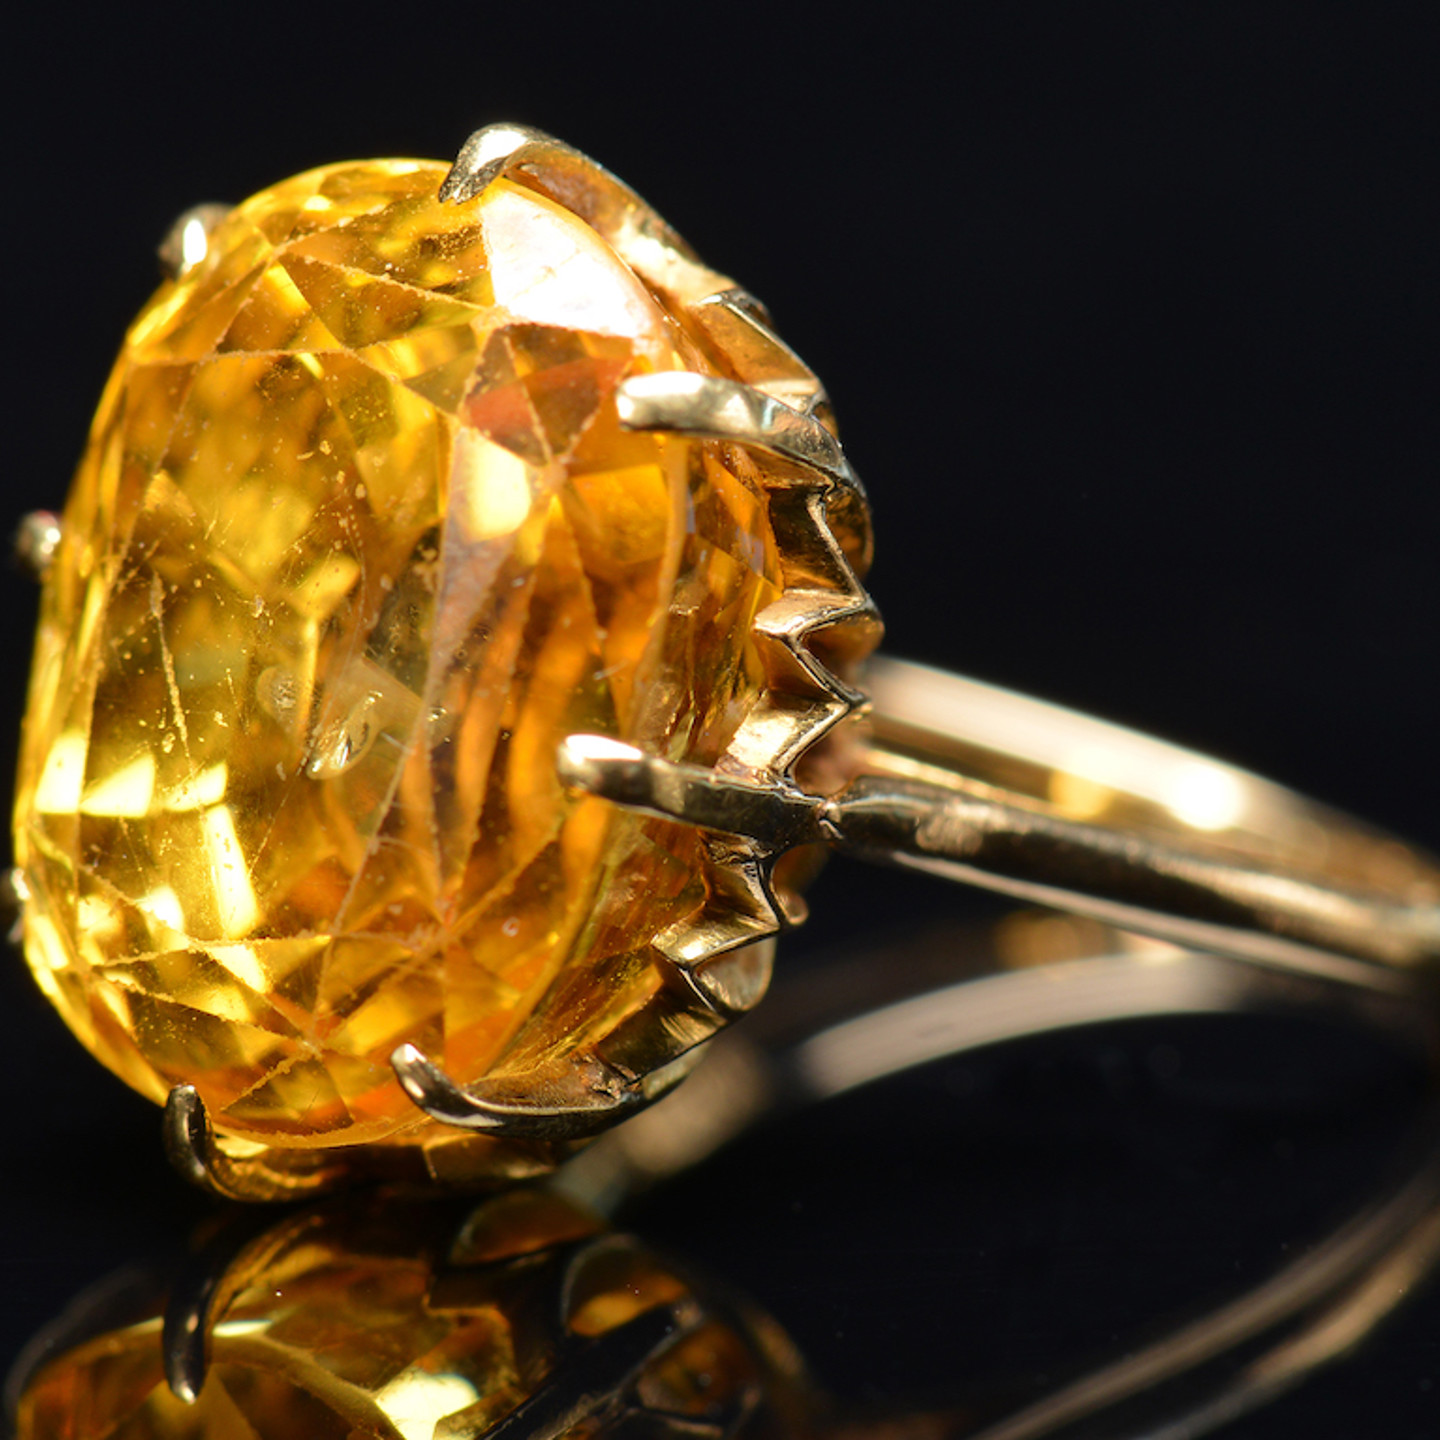 Victorian 18Ct Gold Ring Set With An Oval Cut Yellow Sapphire. Sold For £8,800